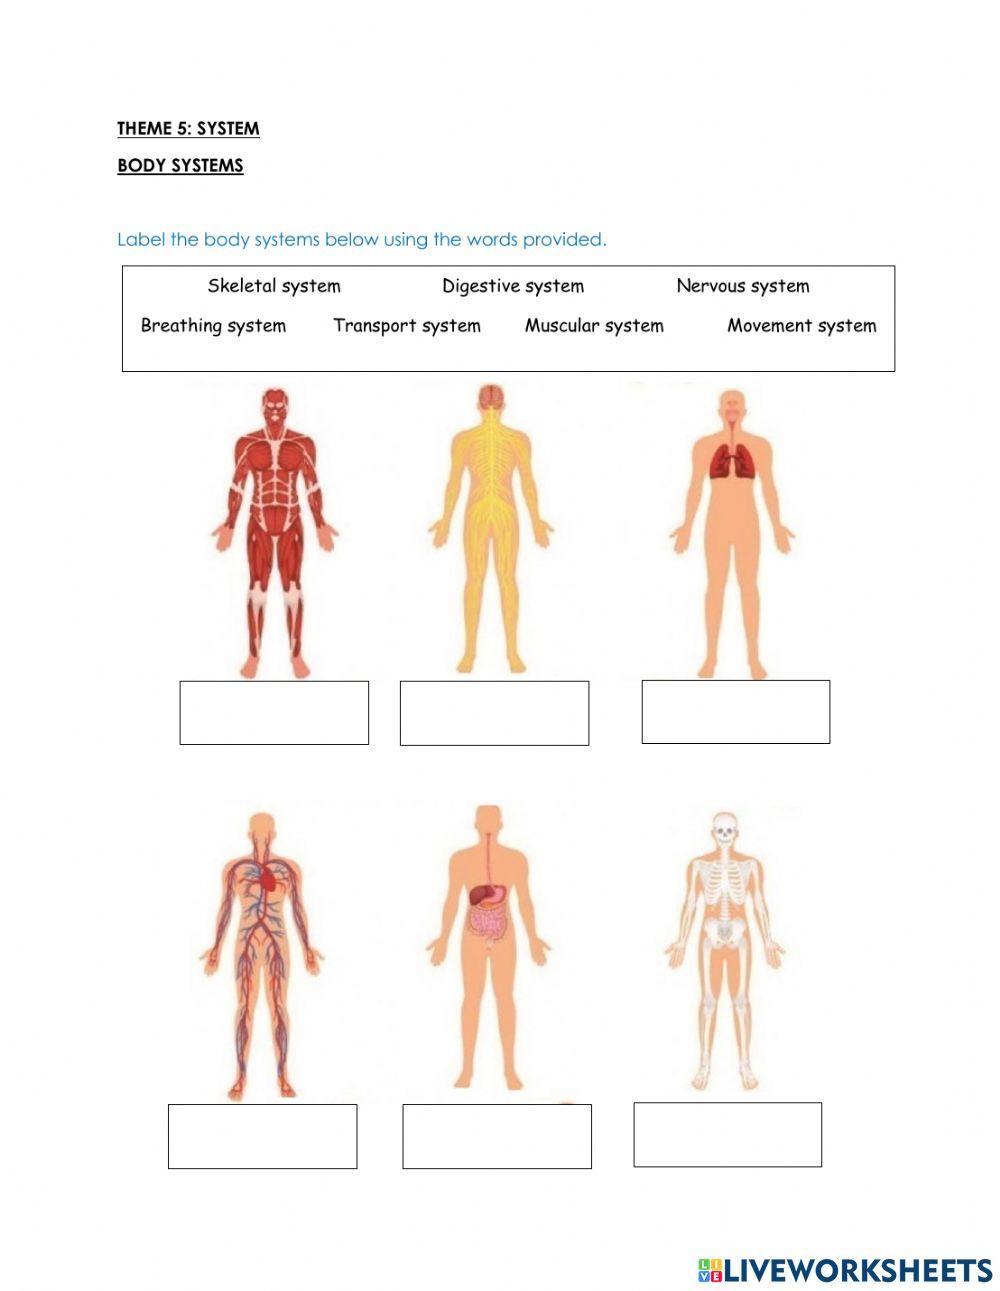 Body systems